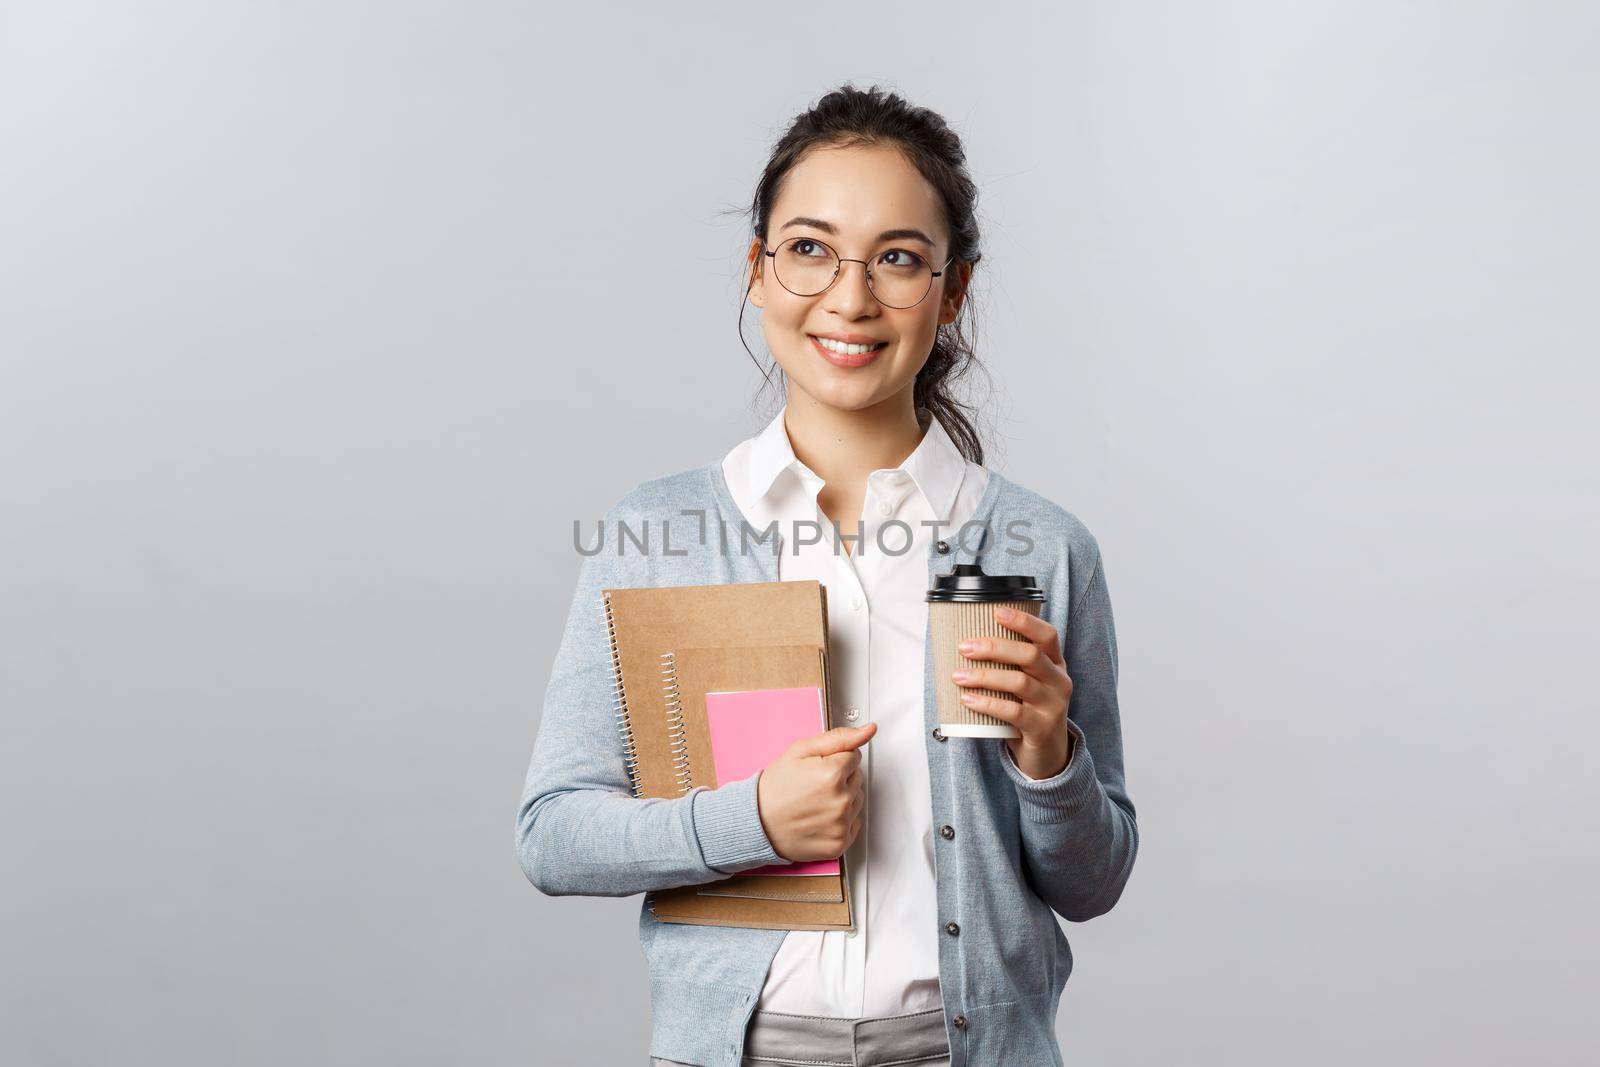 Education, teachers, university and schools concept. Dreamy happy student carry books and notebooks, drinking take-away coffee, daydreaming, smiling thoughtful looking up.